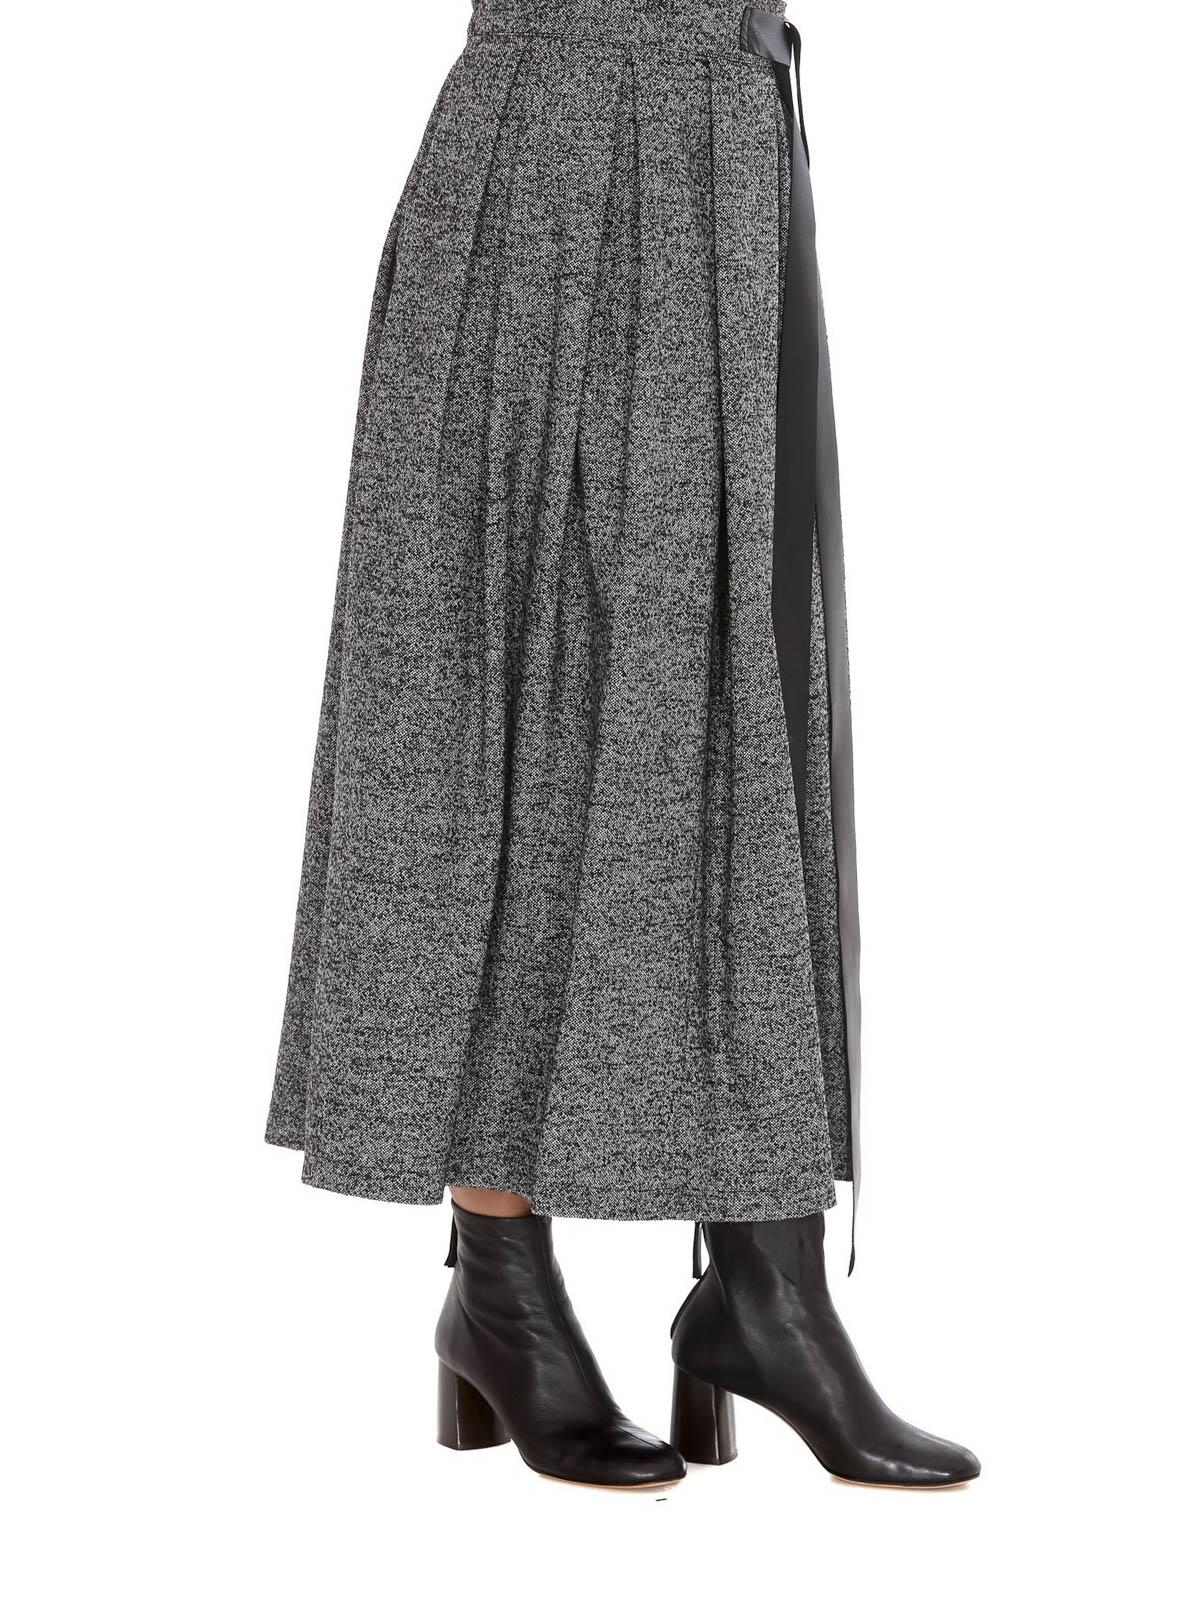 Department 5 Wool Blend Pleated Skirt in Grey (Gray) - Lyst